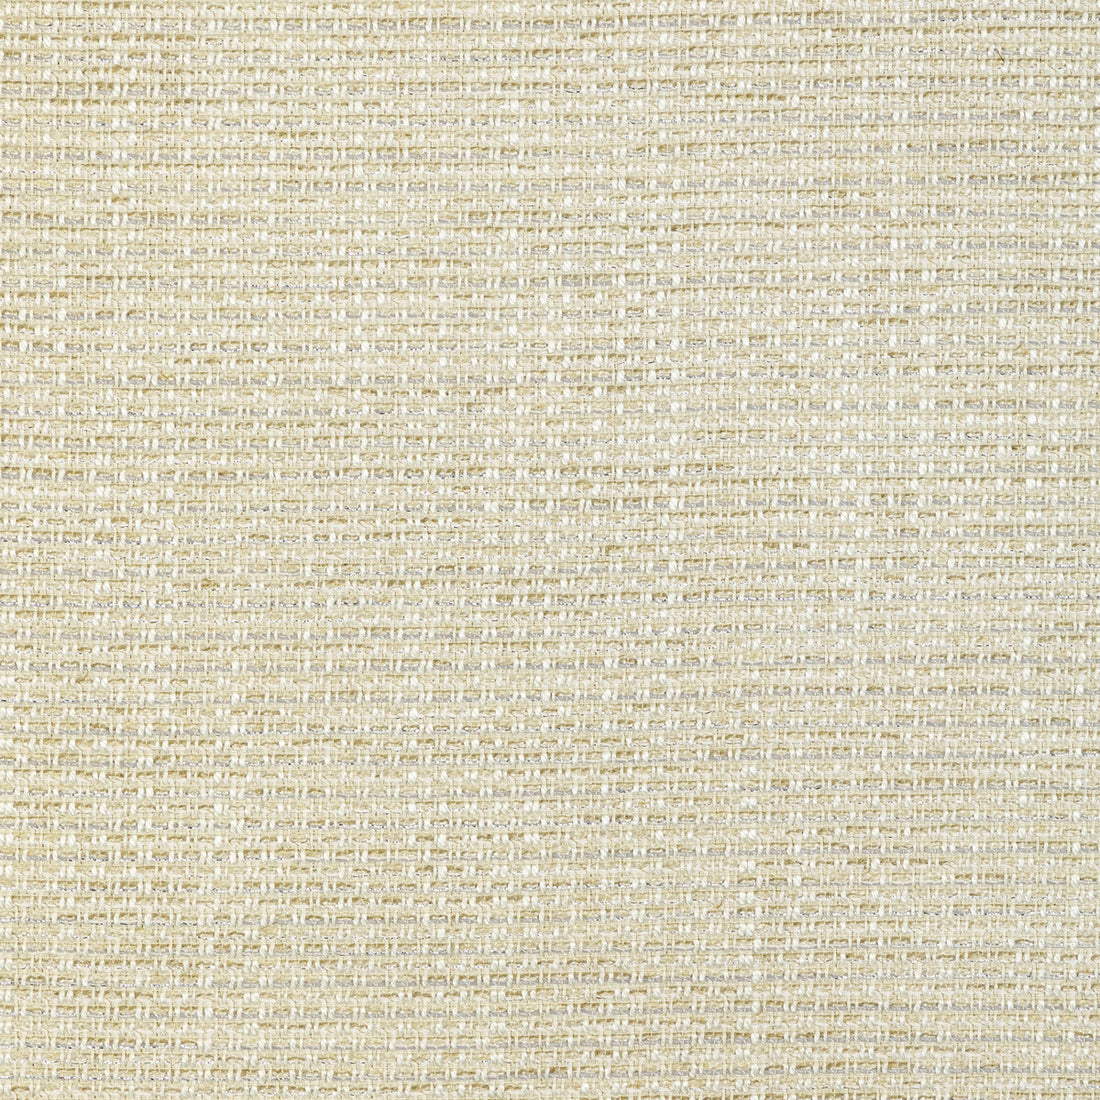 Metallic Wonder fabric in cream color - pattern 36800.16.0 - by Kravet Design in the Candice Olson collection